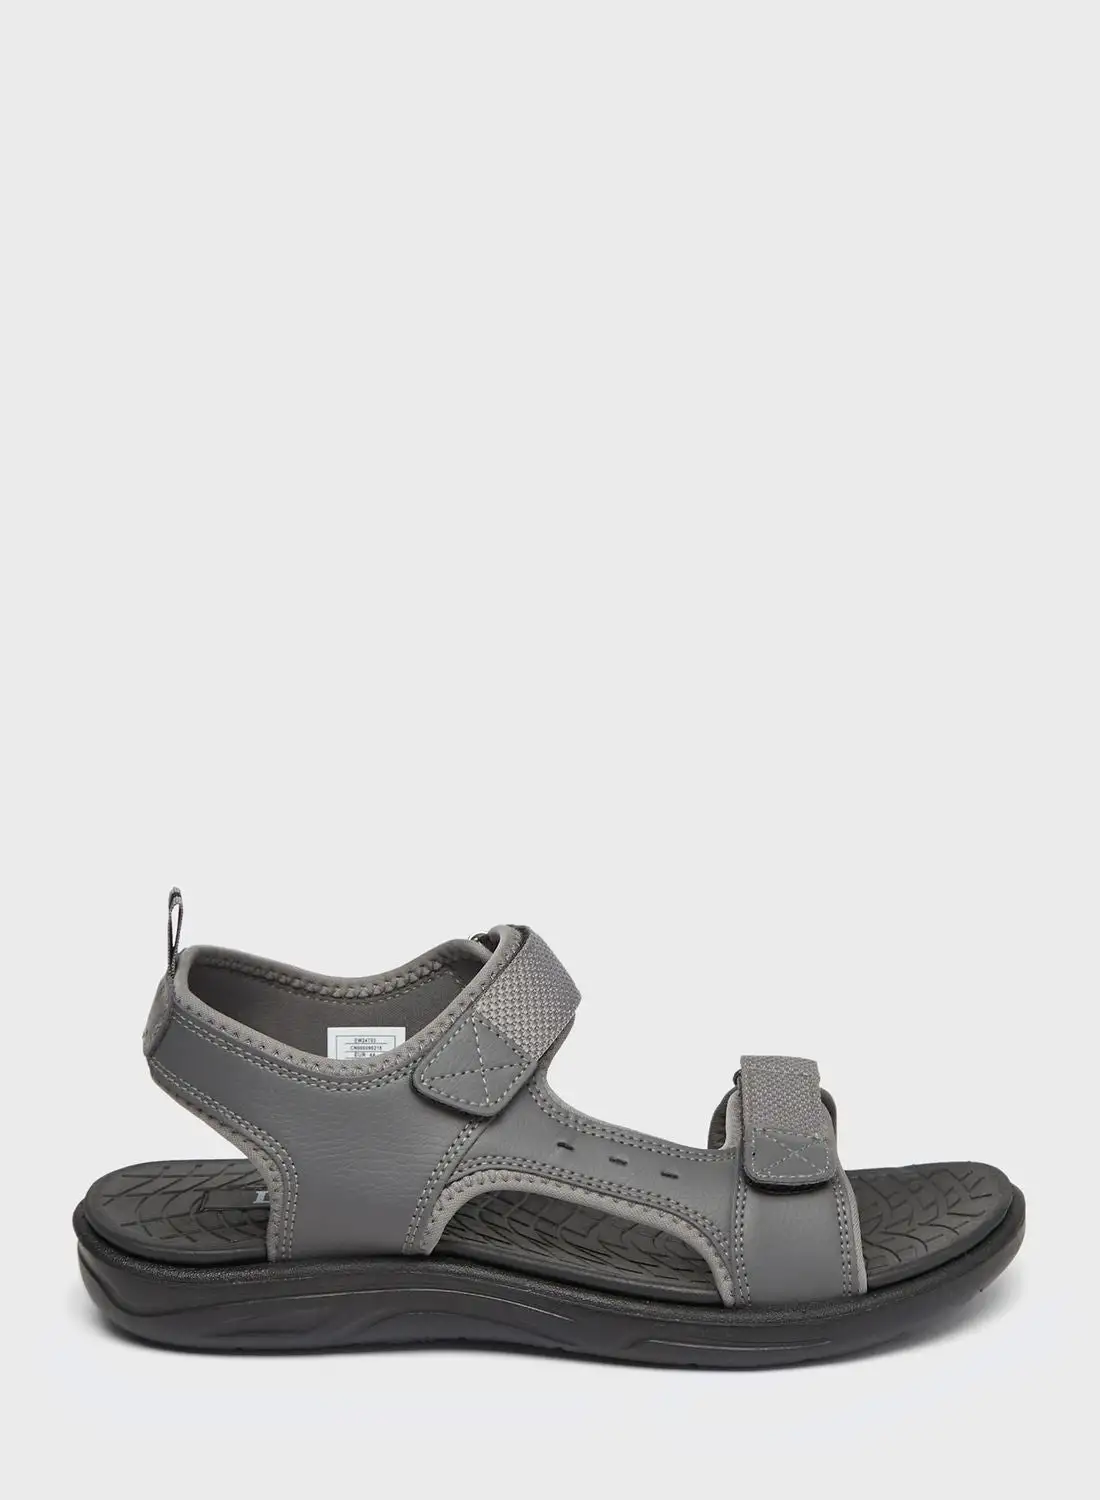 LBL by Shoexpress Casual Velcro Sandals